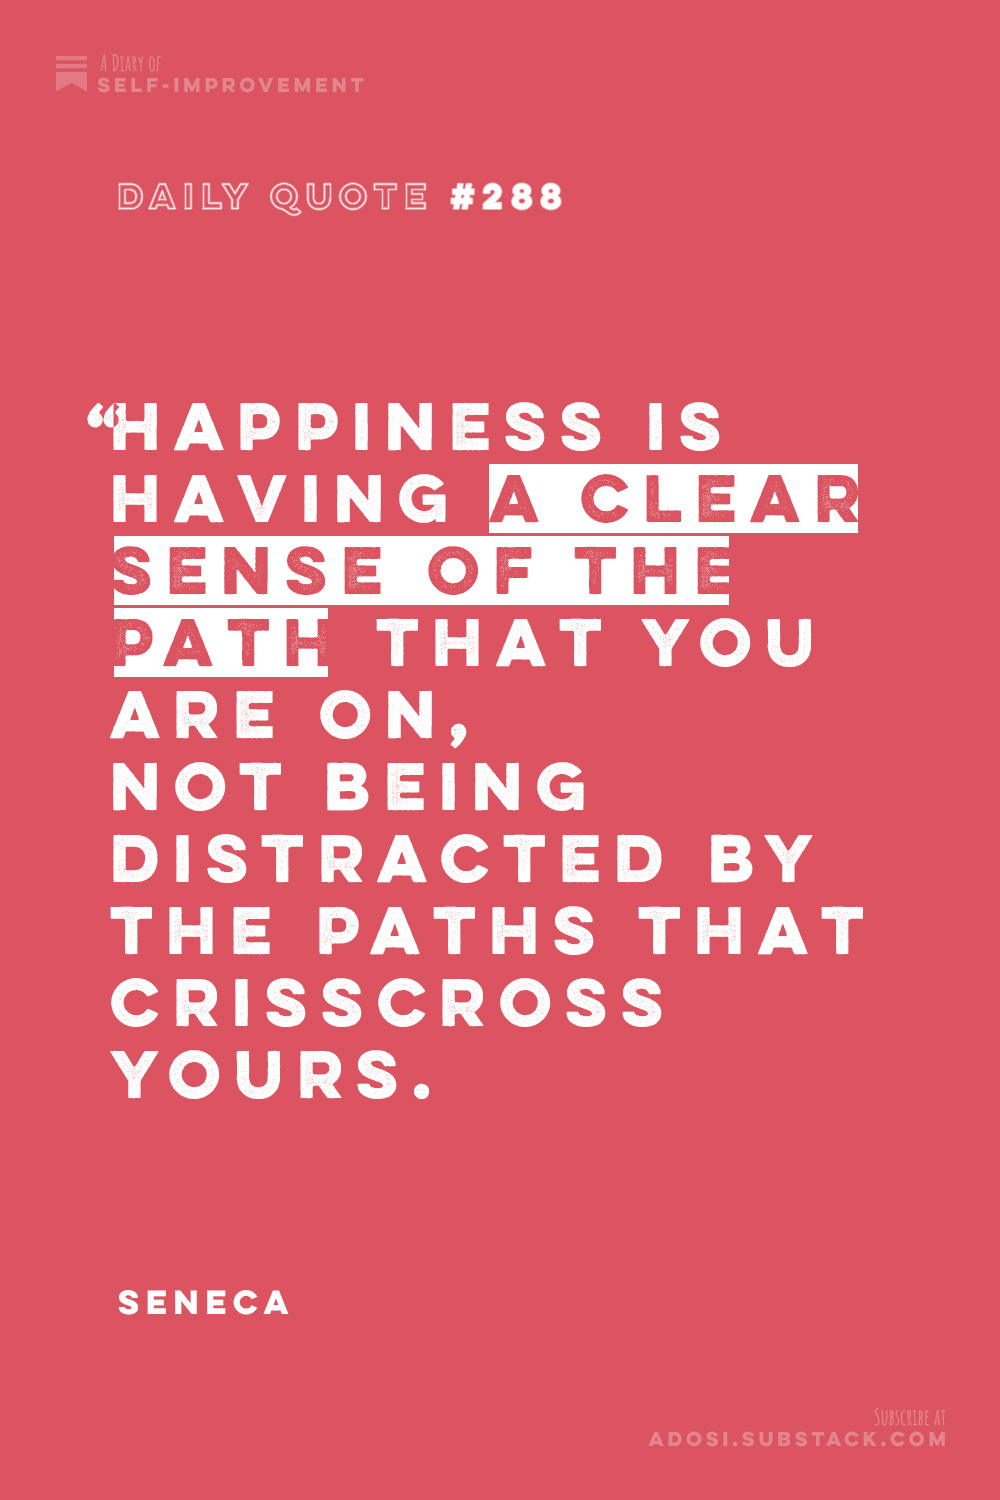 Daily Quote #288: “Happiness is having a clear sense of the path that you are on, not being distracted by the paths that crisscross yours." Seneca